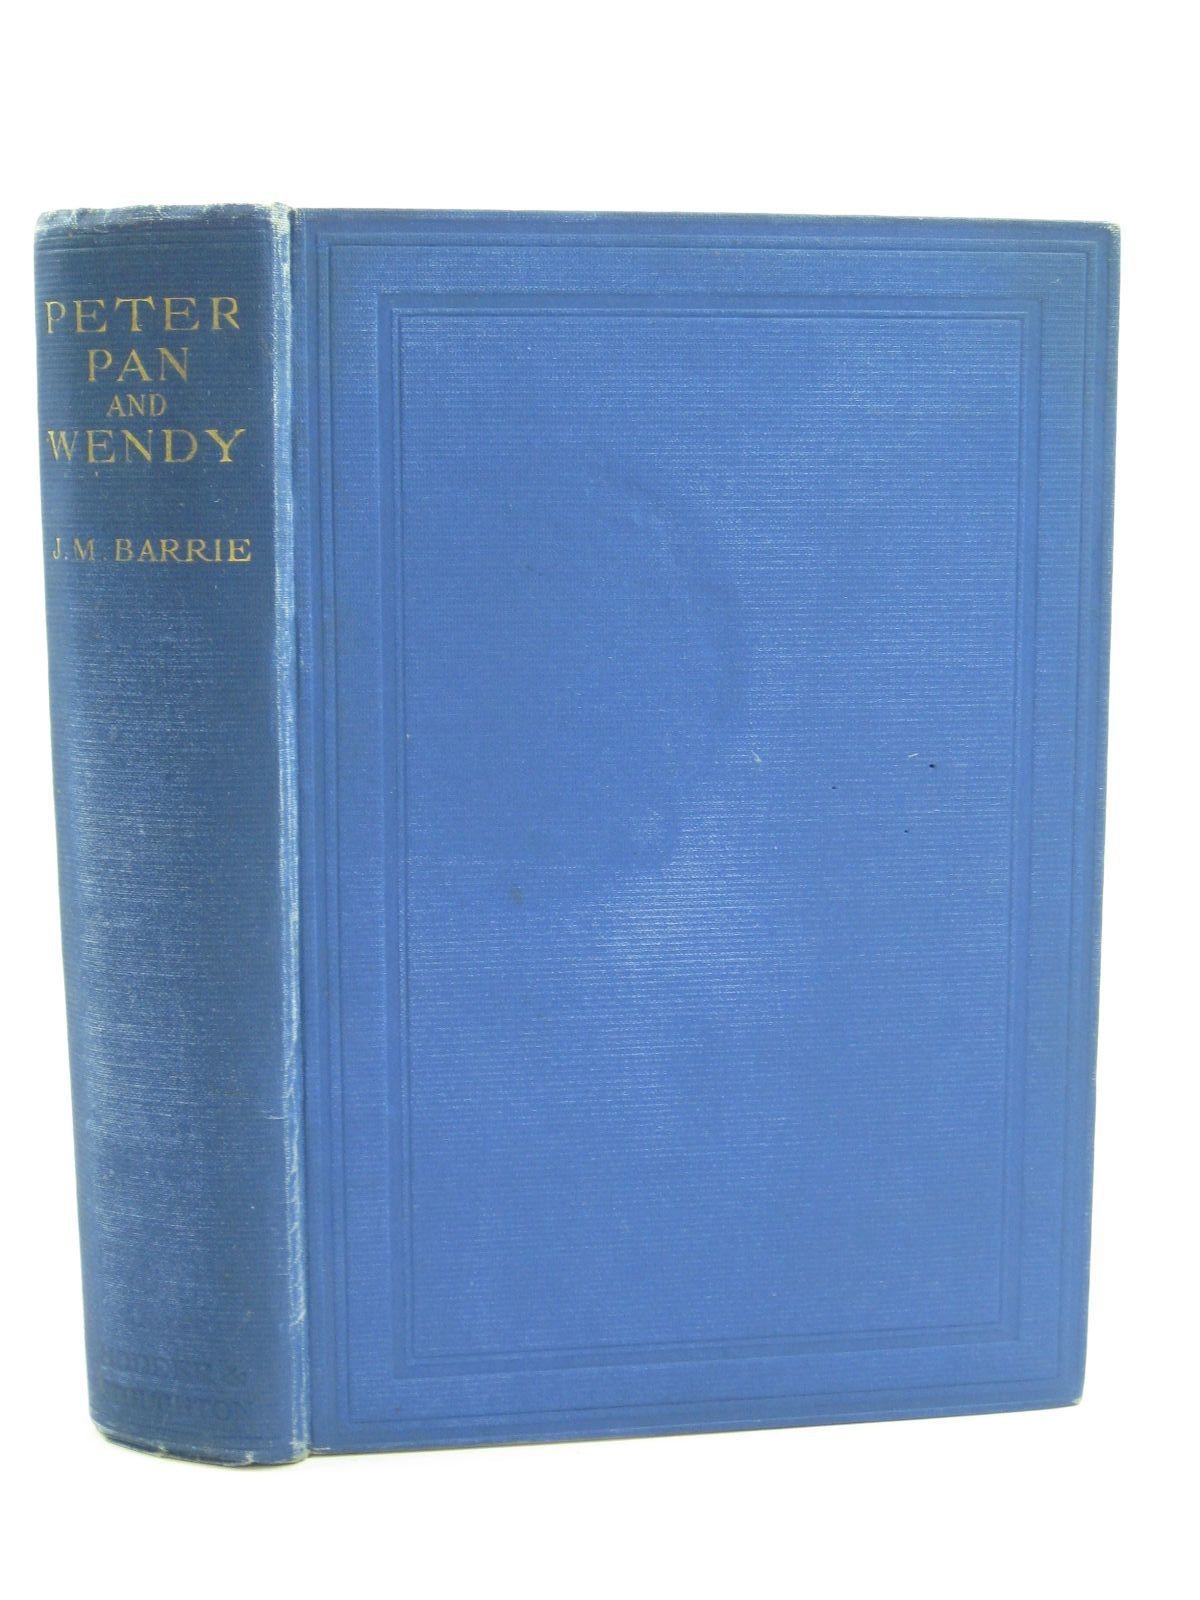 Photo of PETER PAN AND WENDY written by Barrie, J.M. illustrated by Attwell, Mabel Lucie published by Hodder & Stoughton (STOCK CODE: 1406751)  for sale by Stella & Rose's Books